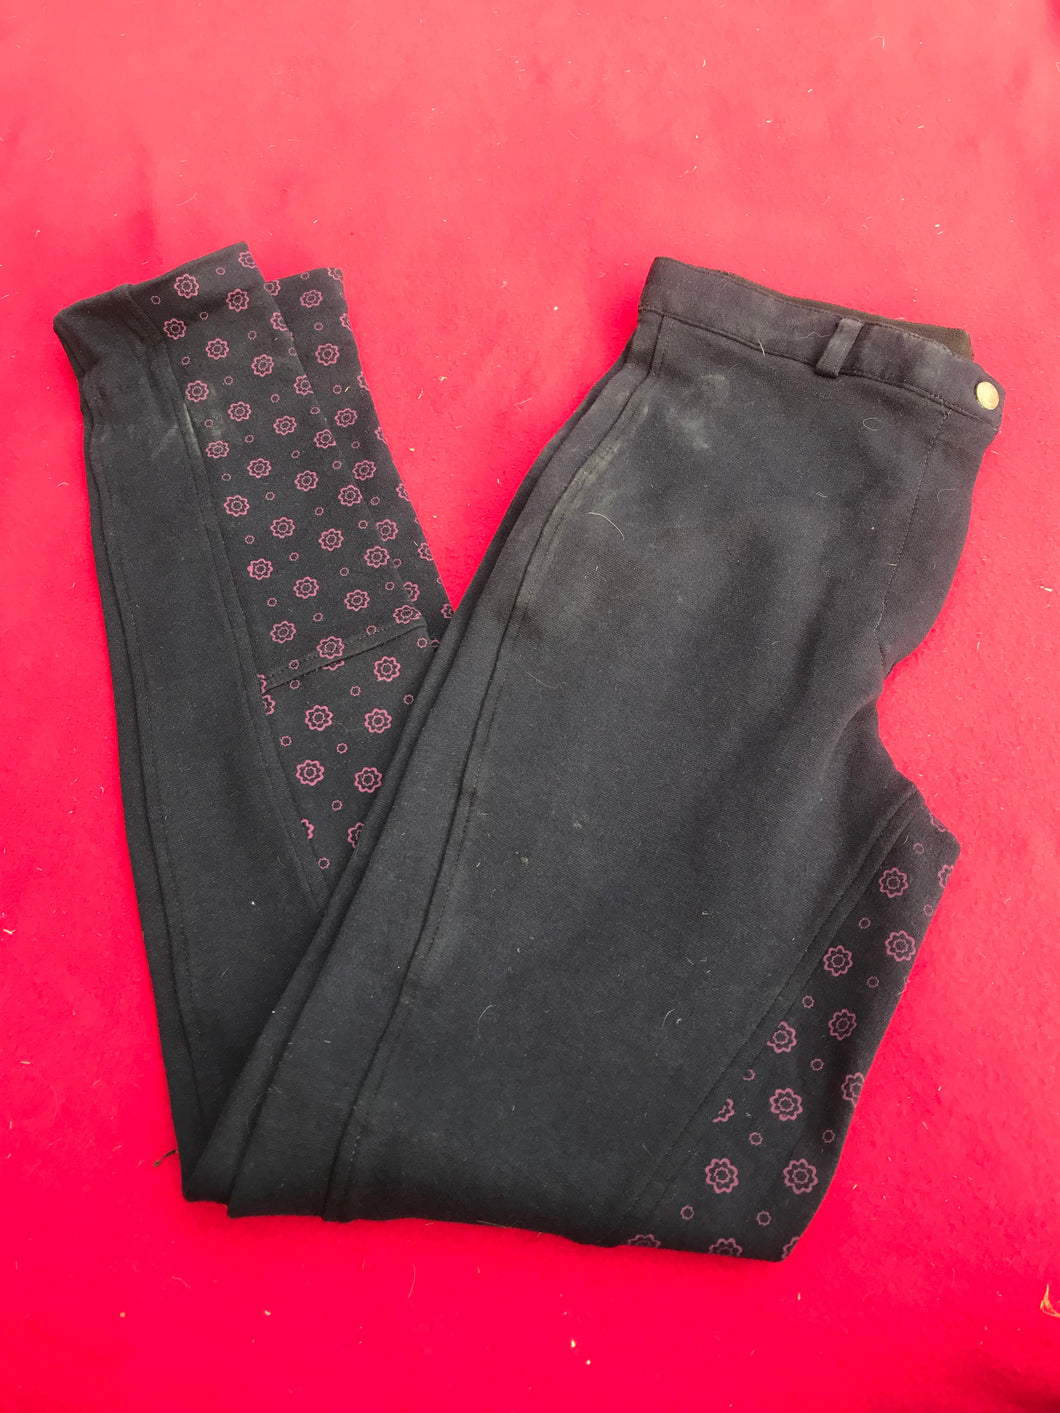 Navy jodhpurs with pink floral design size 8 (26) FREE POSTAGE